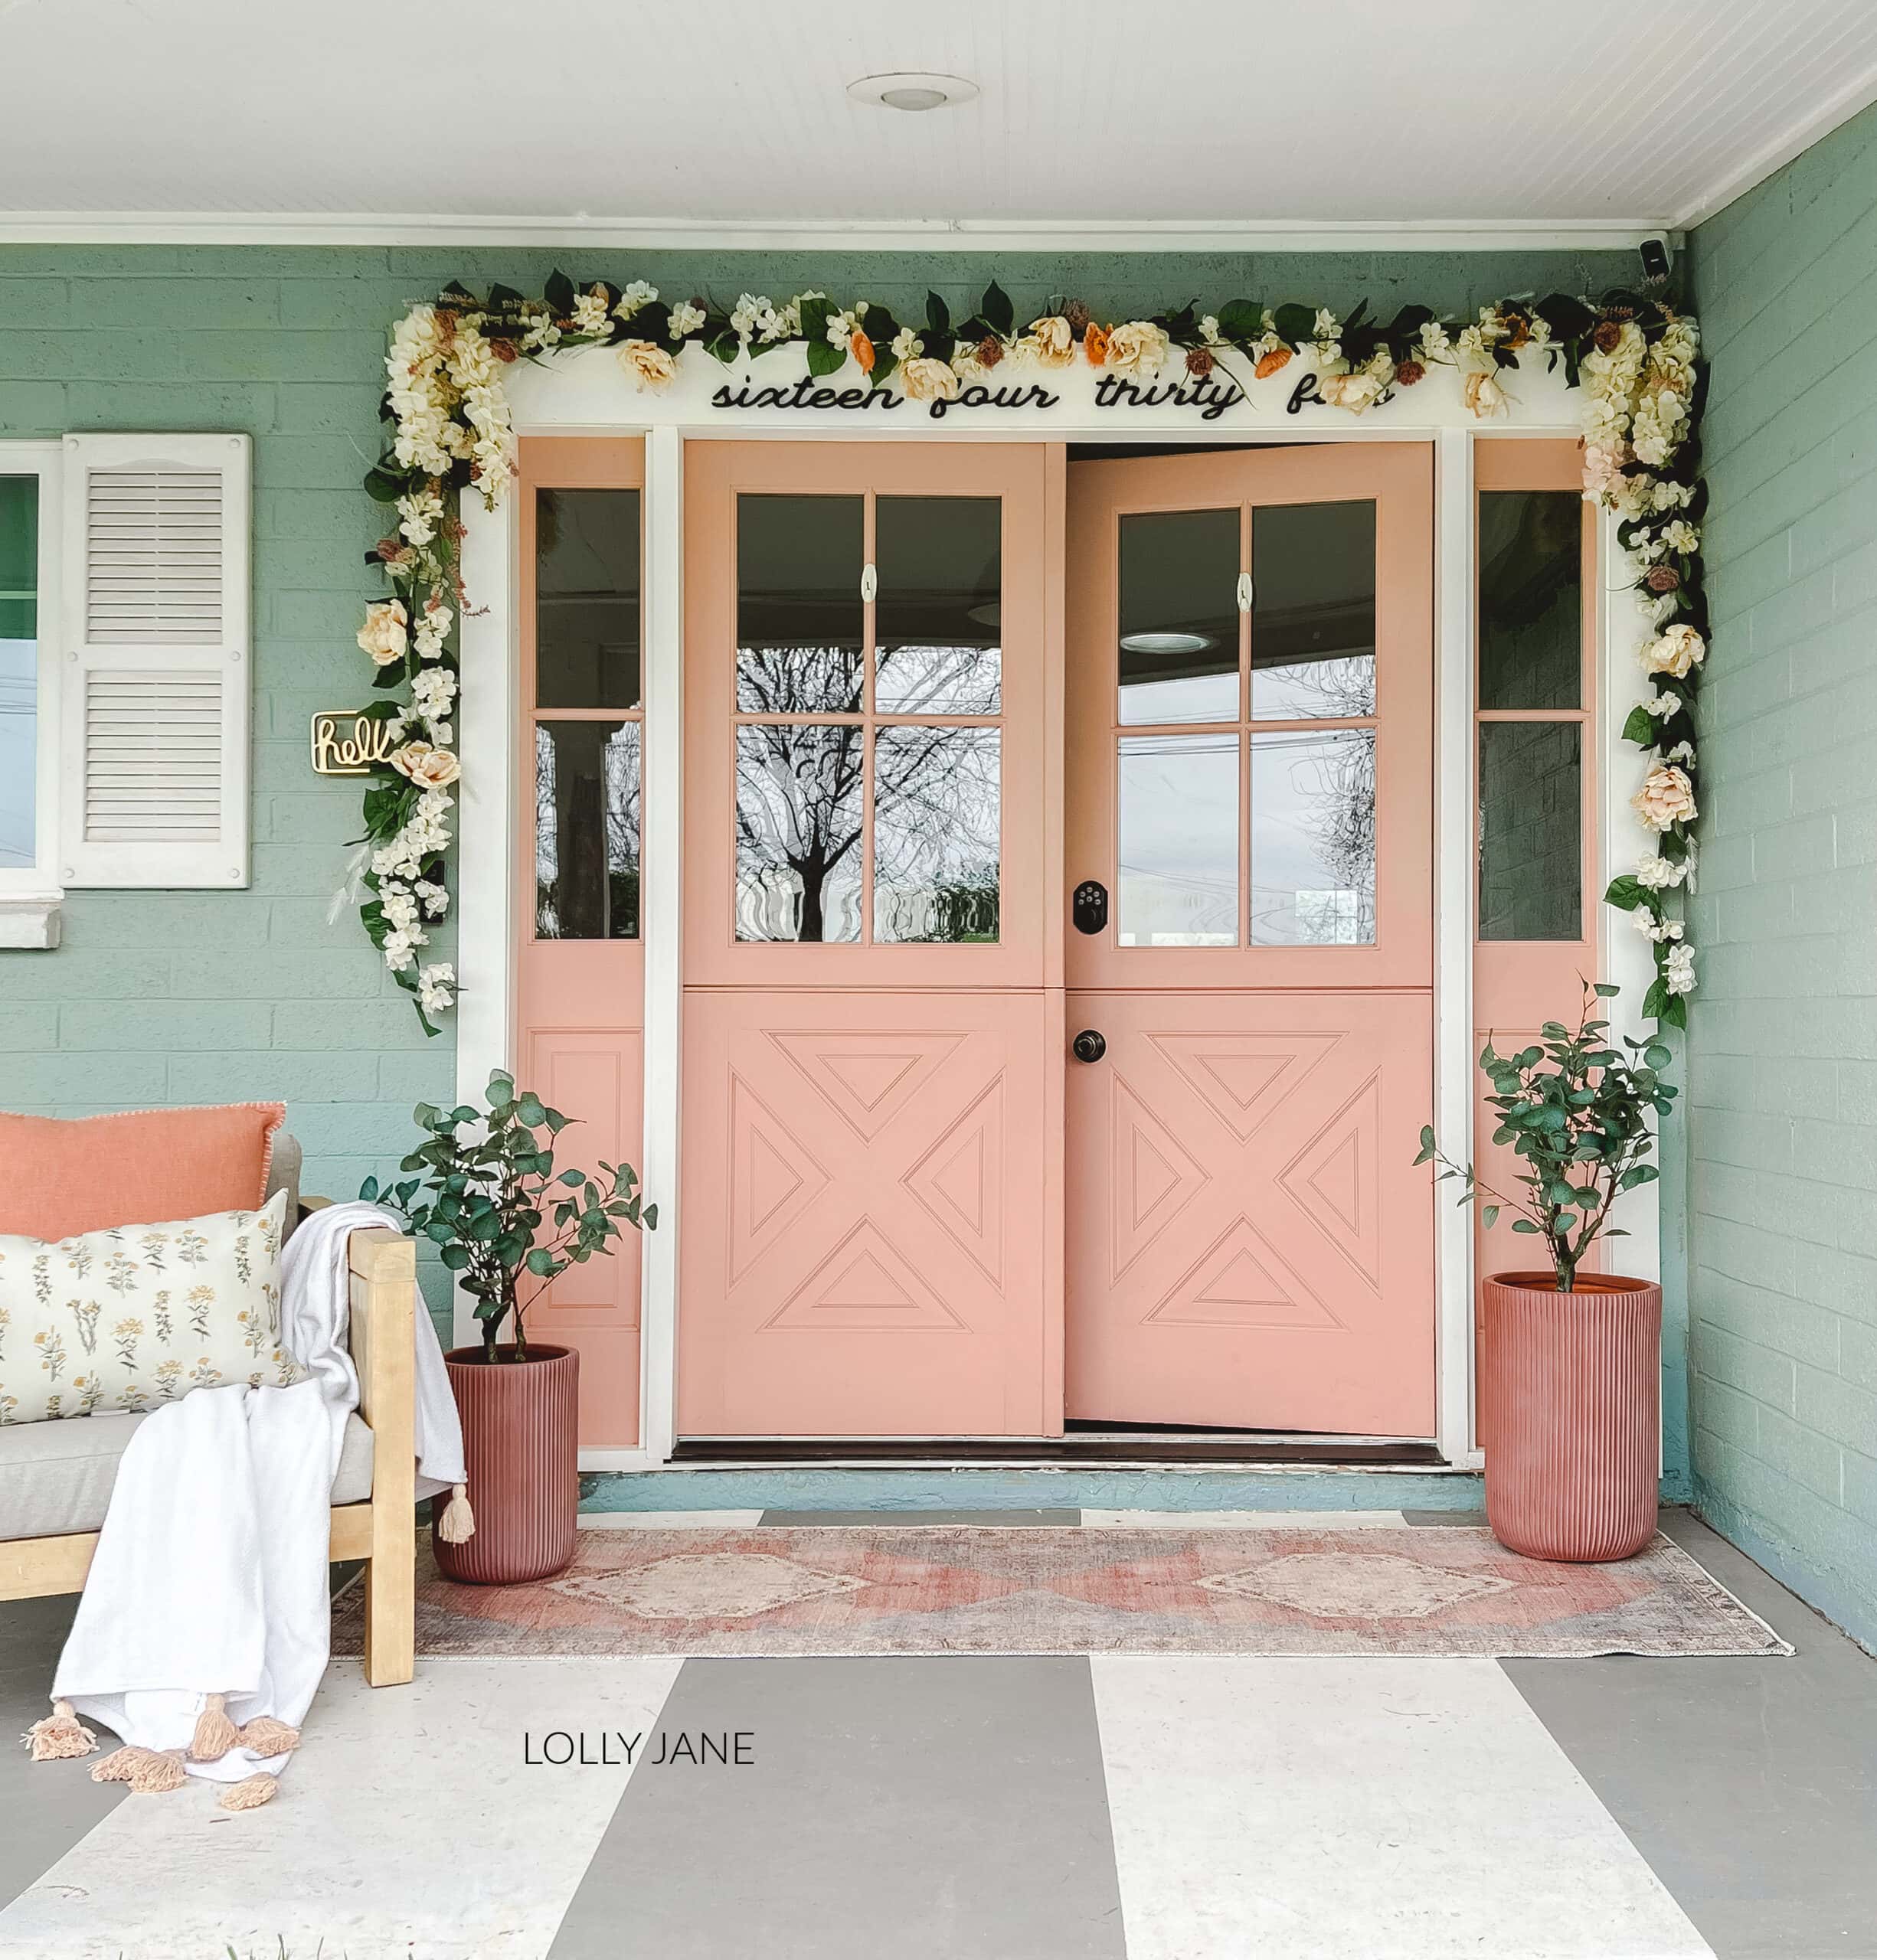 Spring Porch Decoration Ideas, love the floral garland! 🍃🌻🌸